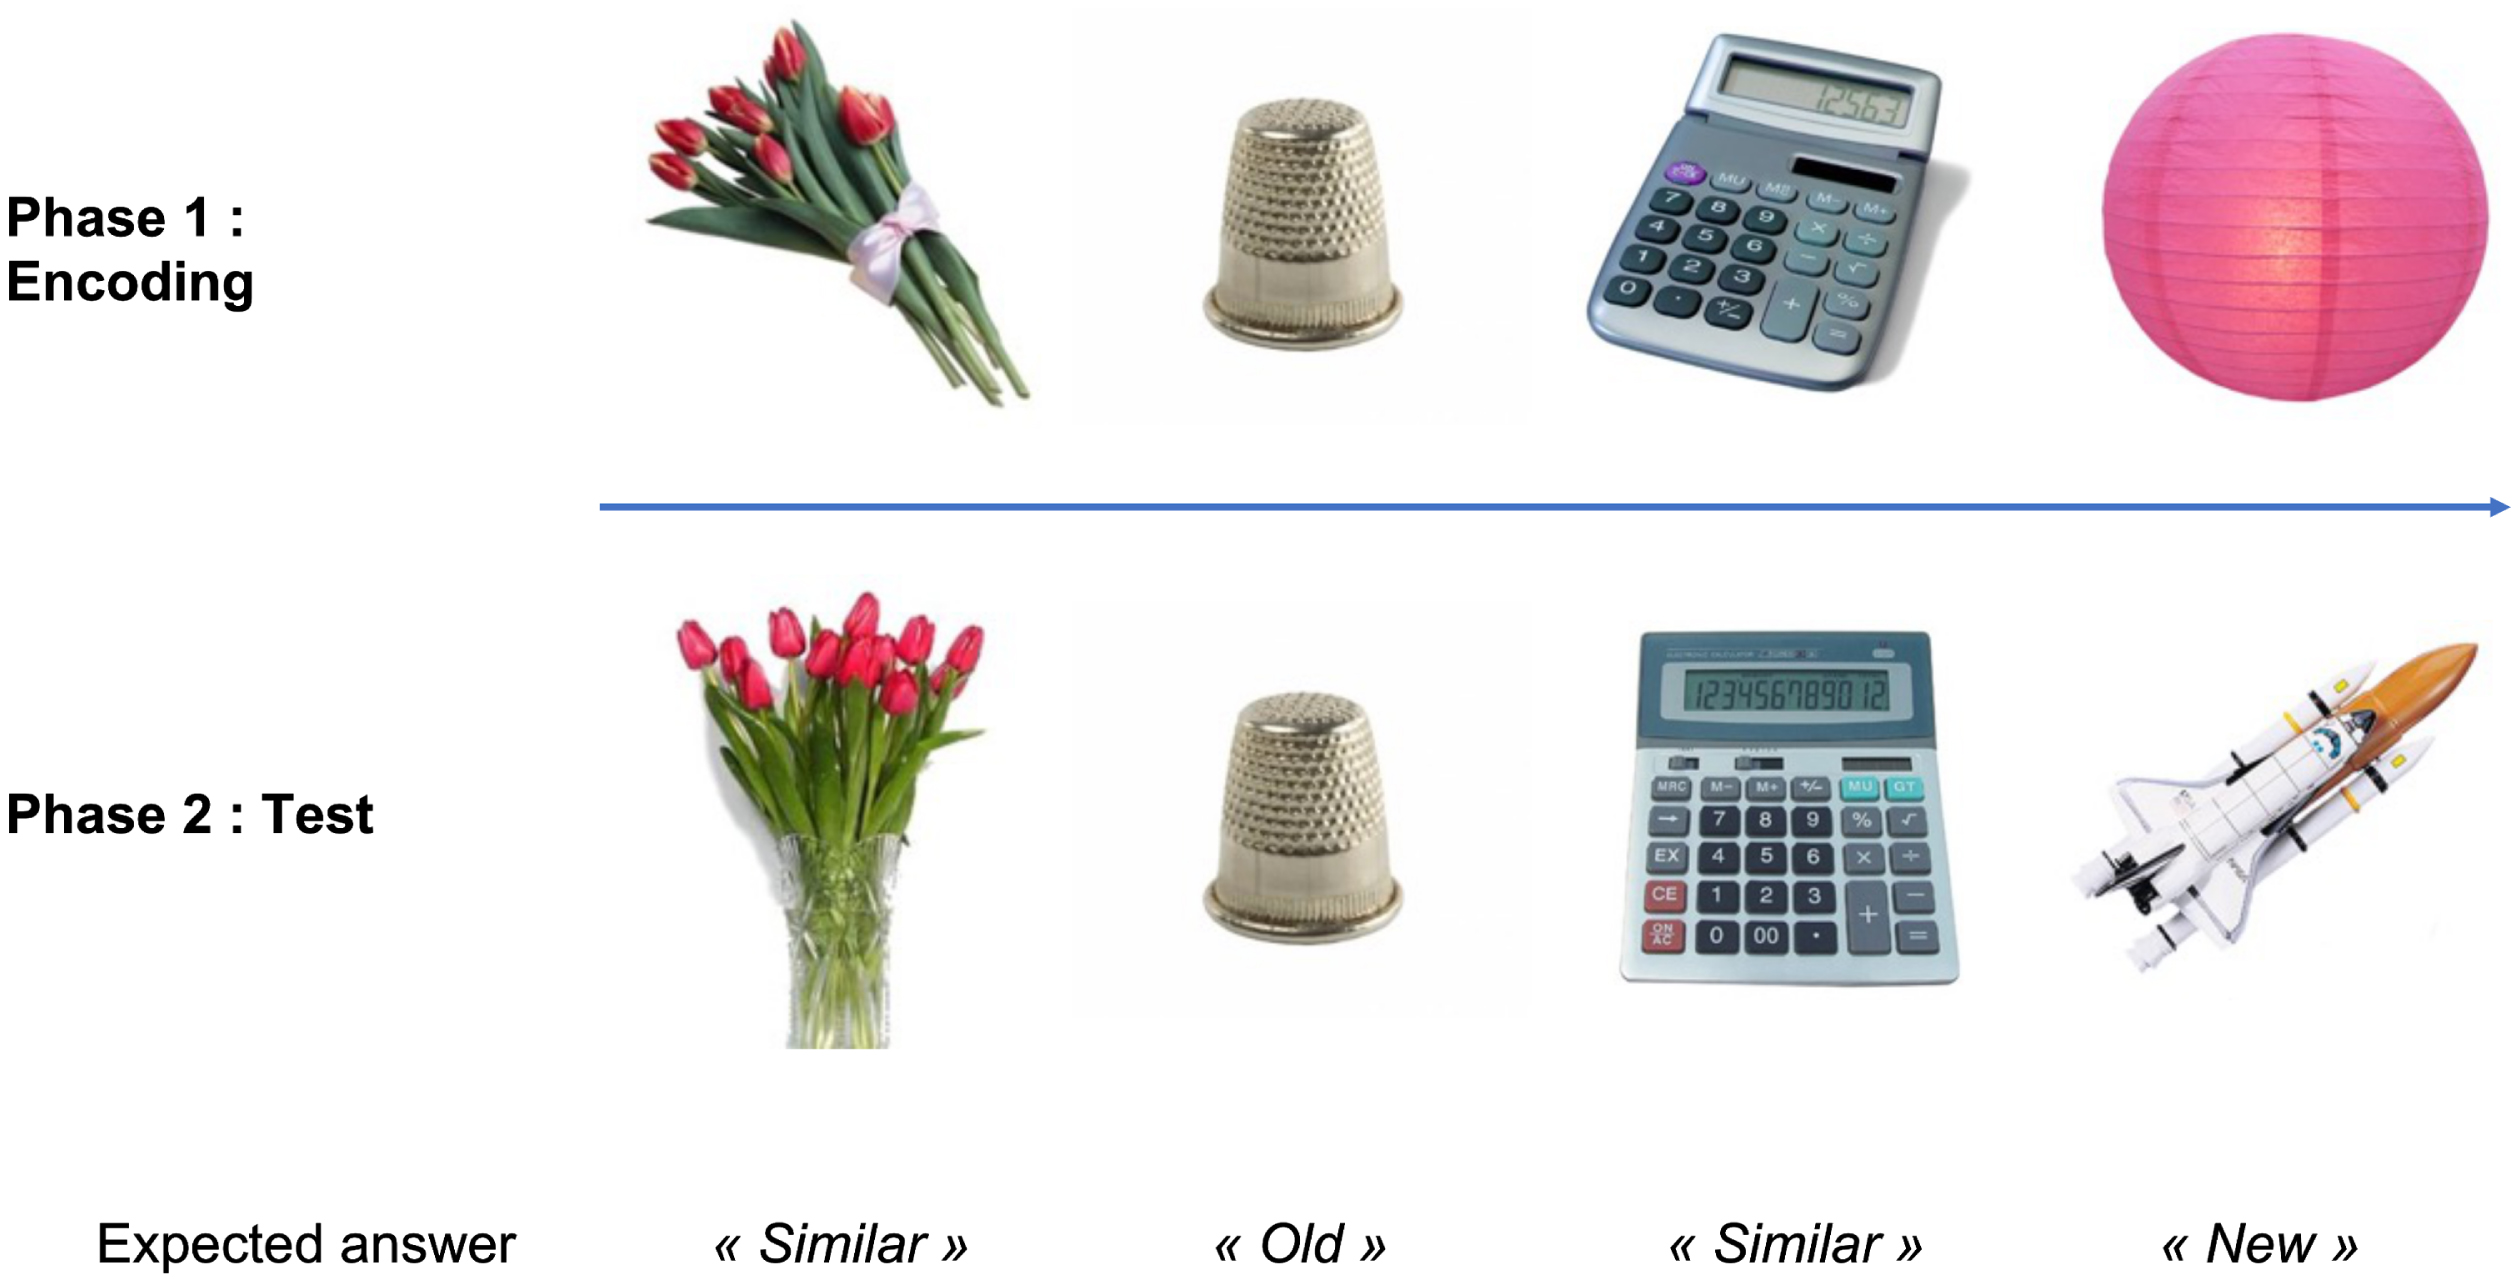 Design of the Mnemonic Similarity Task (MST) and pictures examples. First, participants encode a set of pictures. In the second phase (surprise recognition memory test), participants should identify “old”, “new”, or “similar” objects as exactly the same pictures, novel foils, or lures related but not identical to previous pictures, respectively. Mnemonic discrimination performance is measured by the lure discrimination index: the rate of “similar” responses to the lure minus the rate of “similar” responses to the foils. (Pictures are from the MST, freely available at http://faculty.sites.uci.edu/starklab).